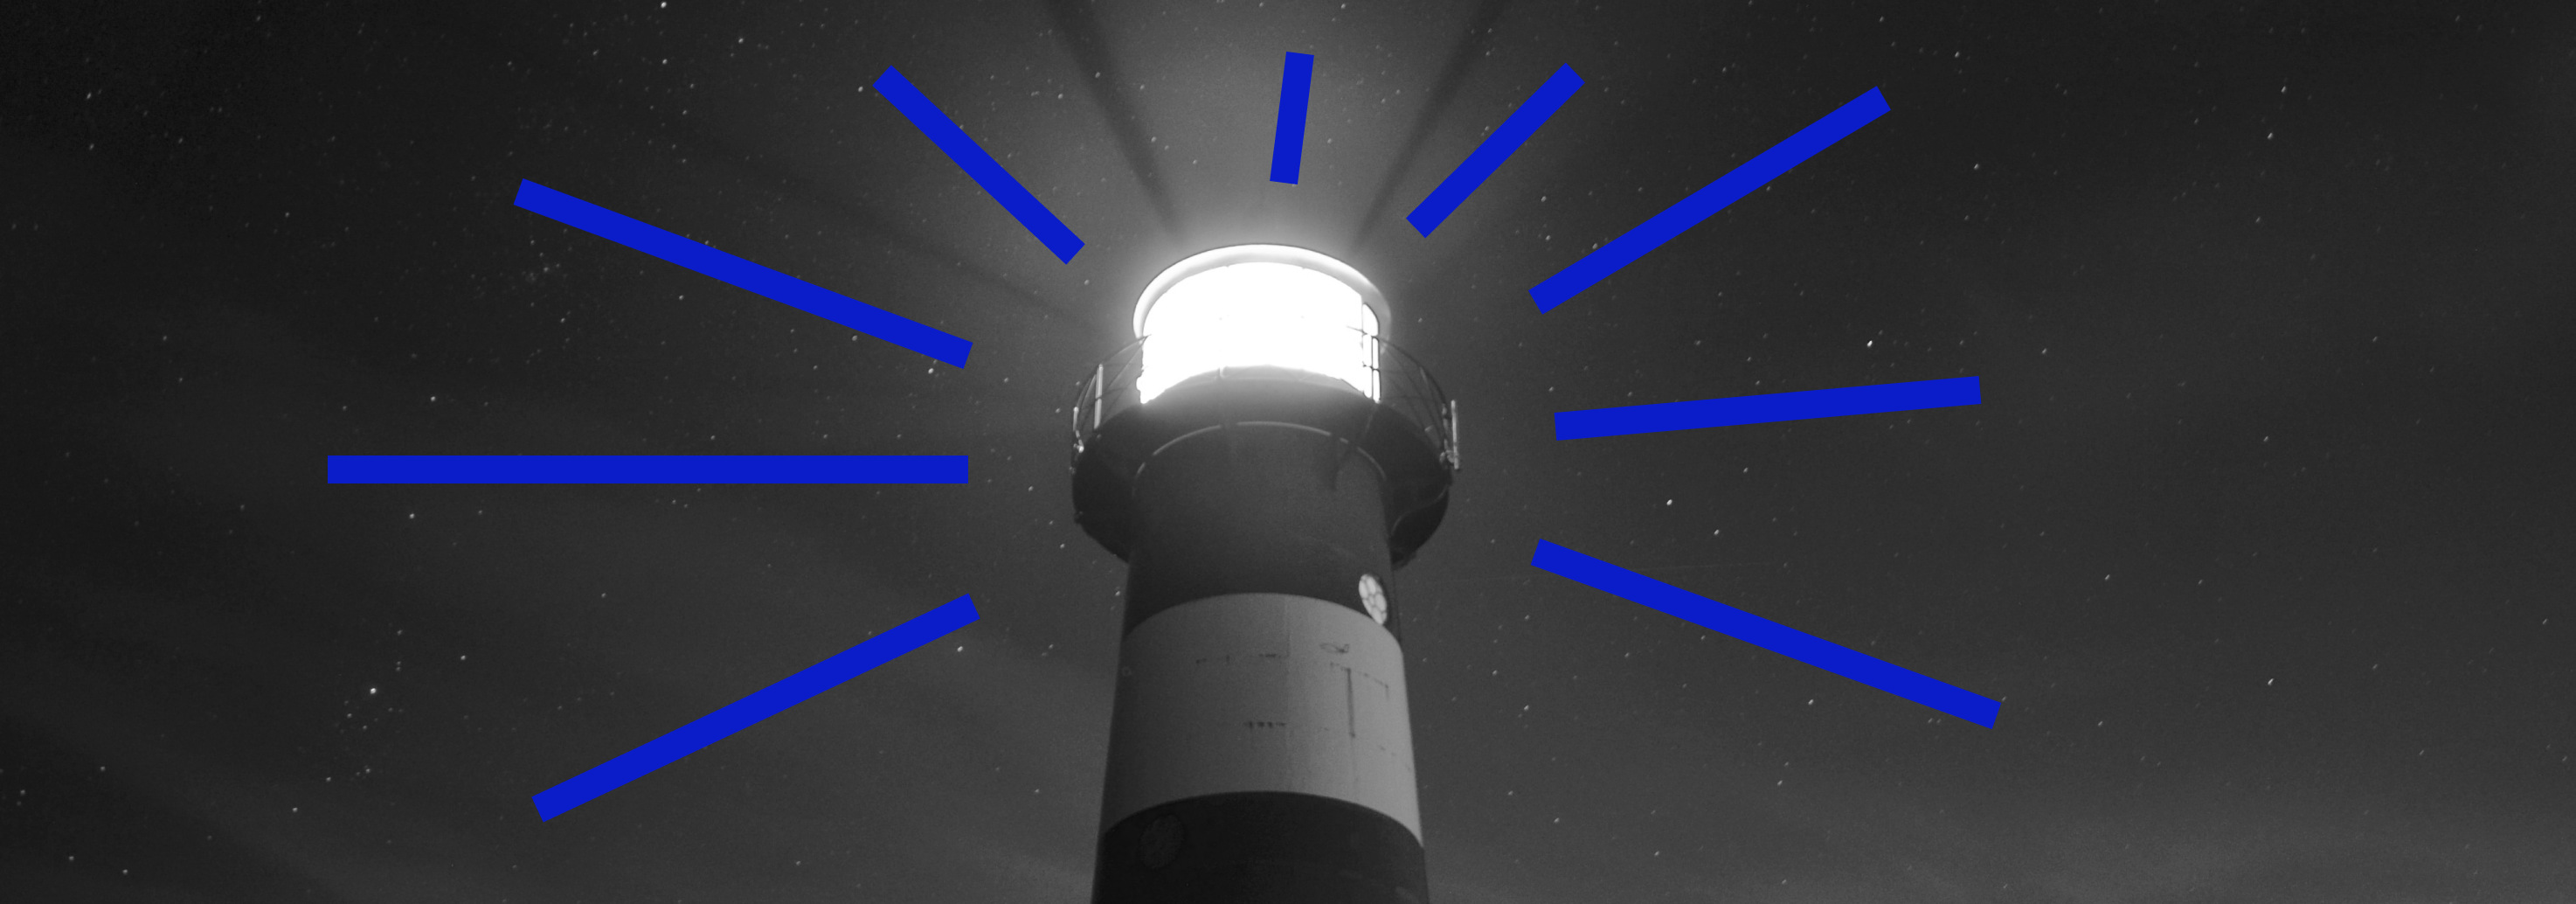 Image of a lighthouse beacon